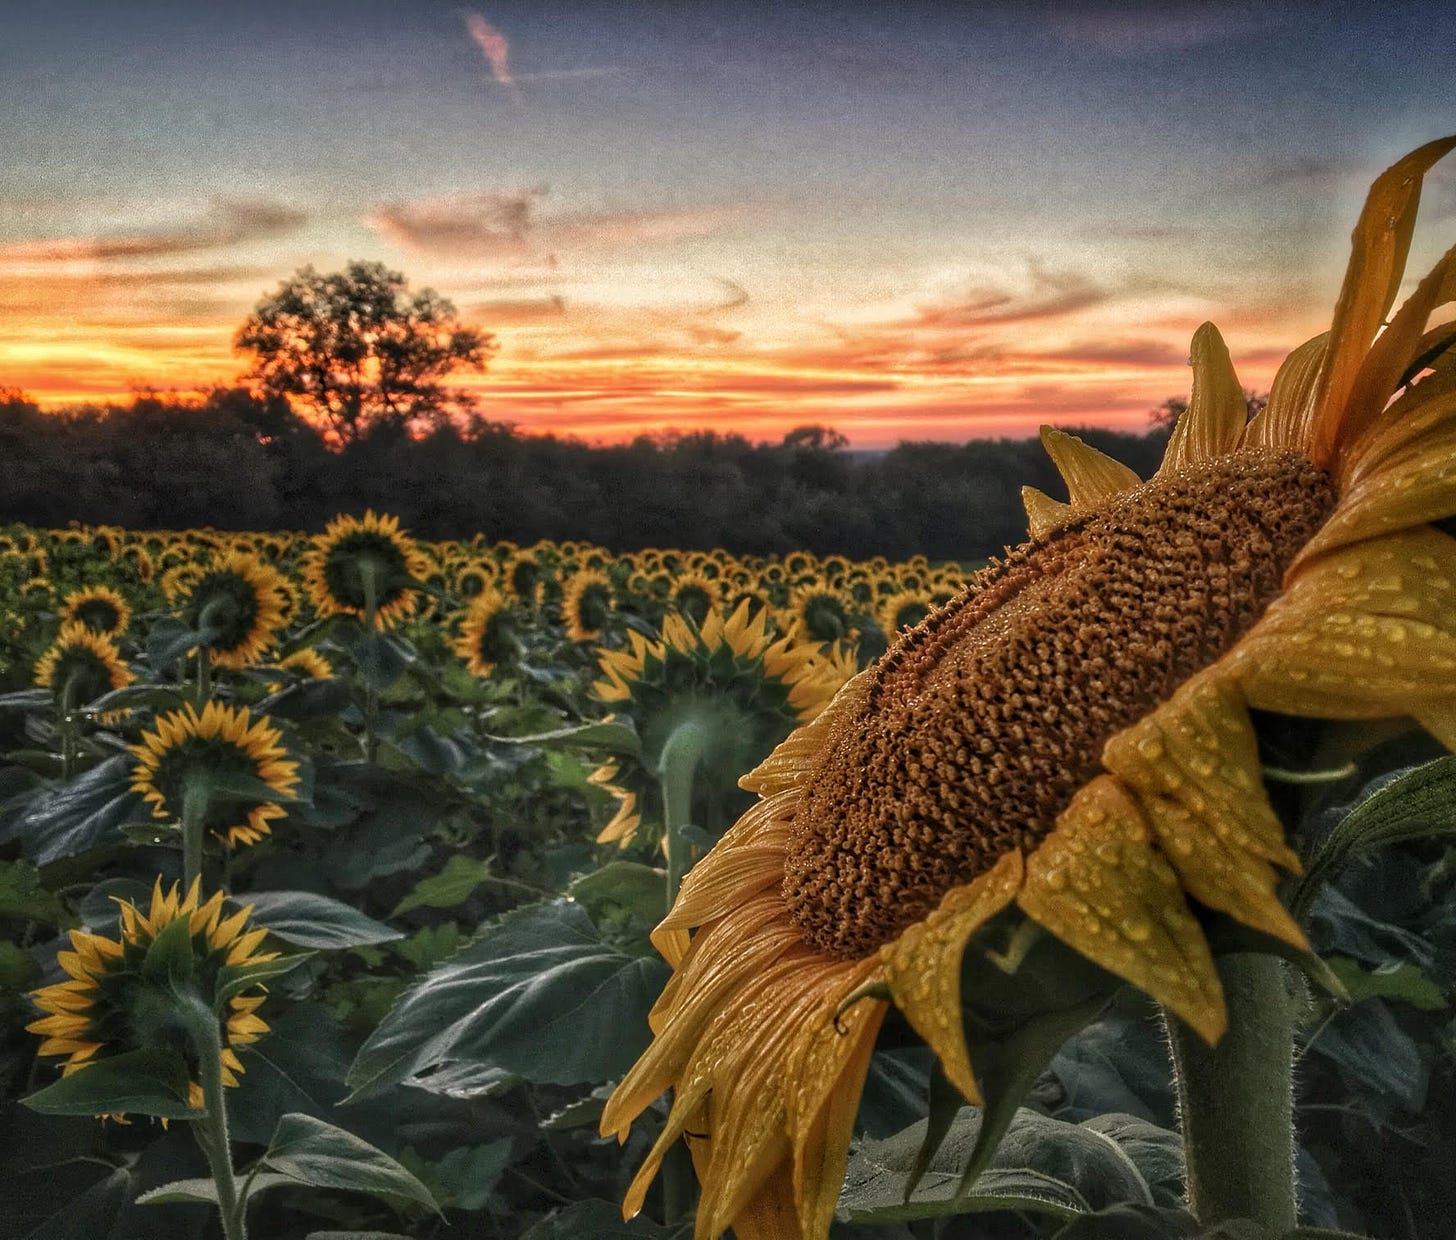 Sunrise is starting over a field of sunflowers which are all turned to face the sun, except for a large sunflower in the foreground which faces left.